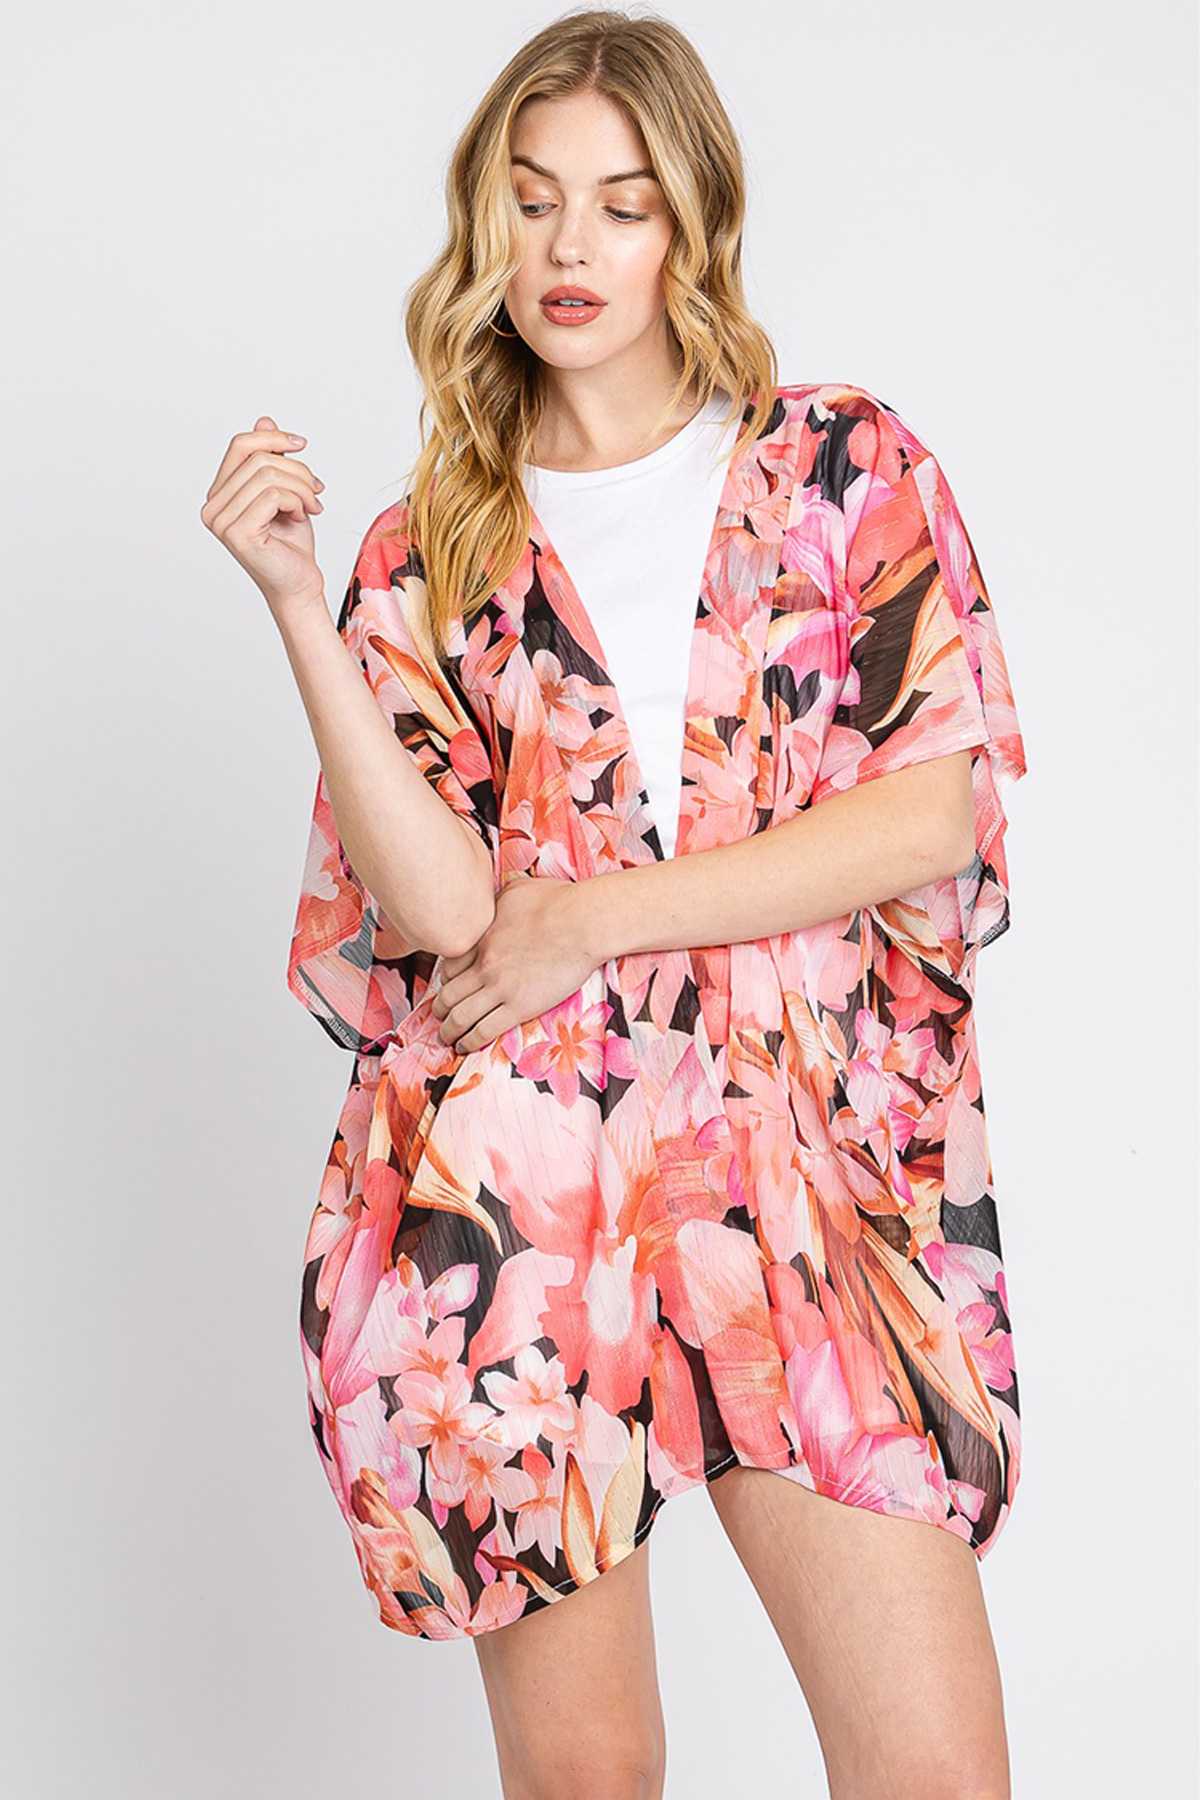 Floral Print Cover up